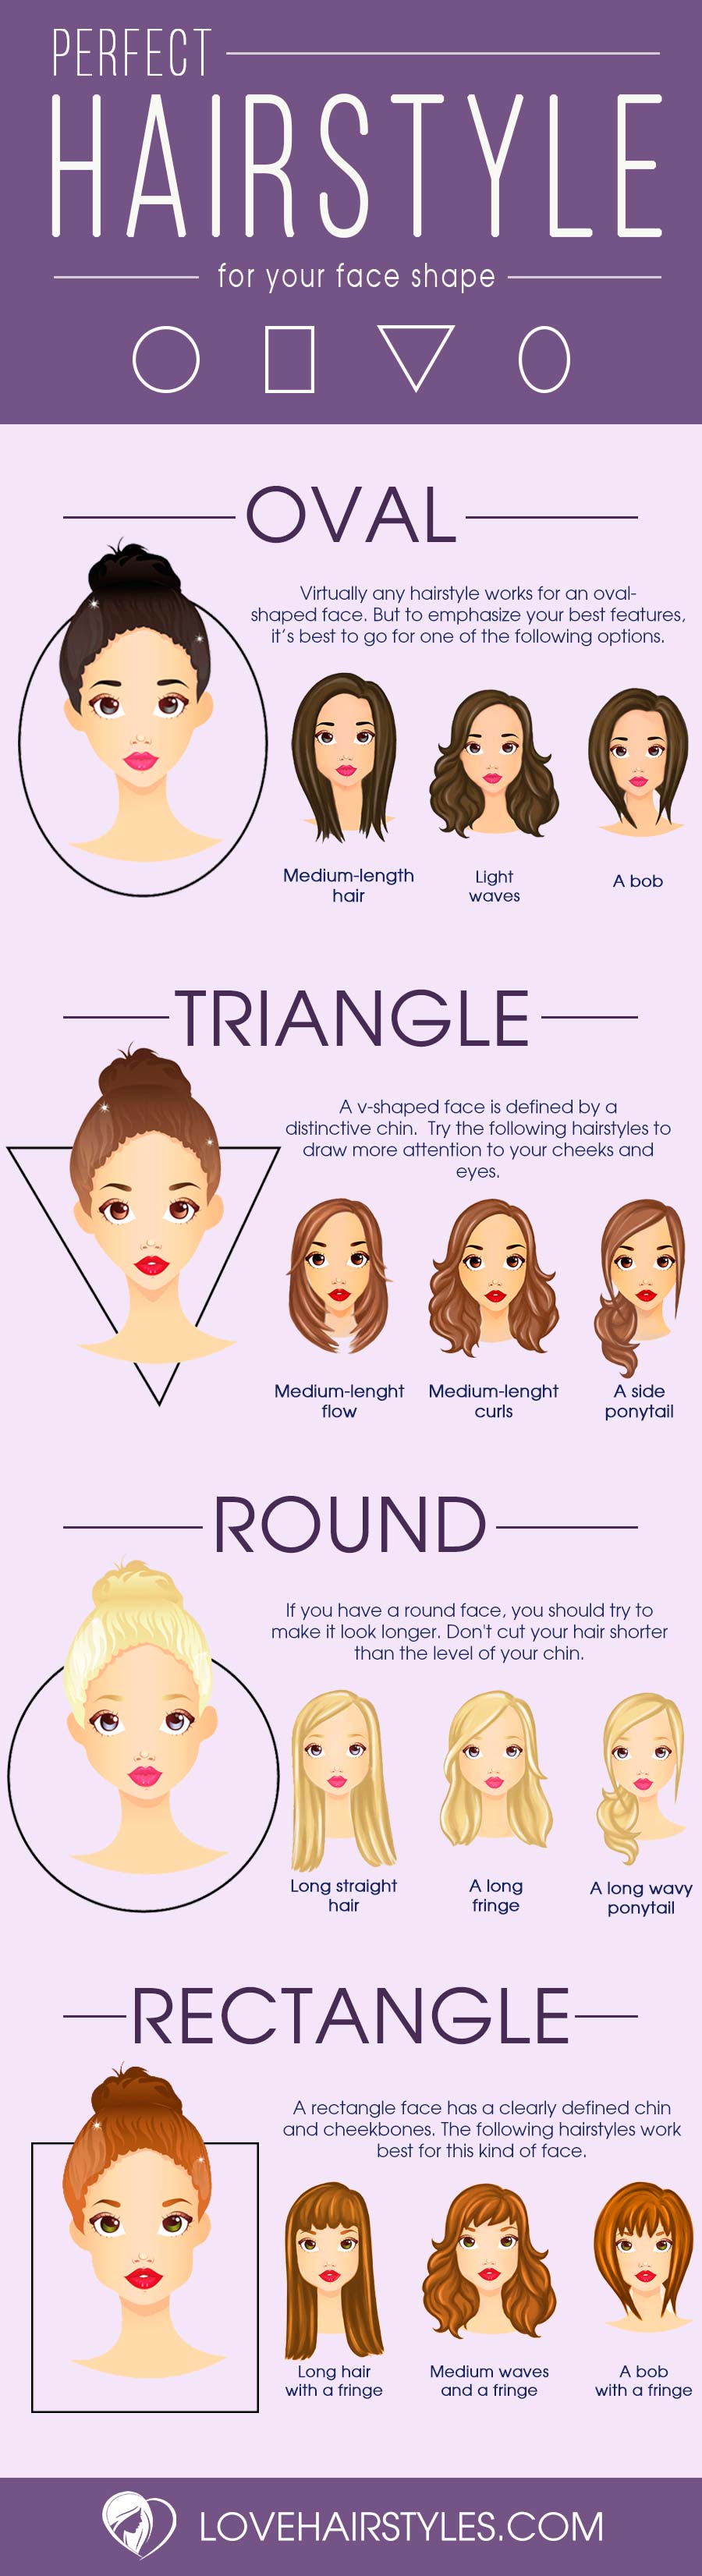 Perfect Hairstyle for Your Face Shape